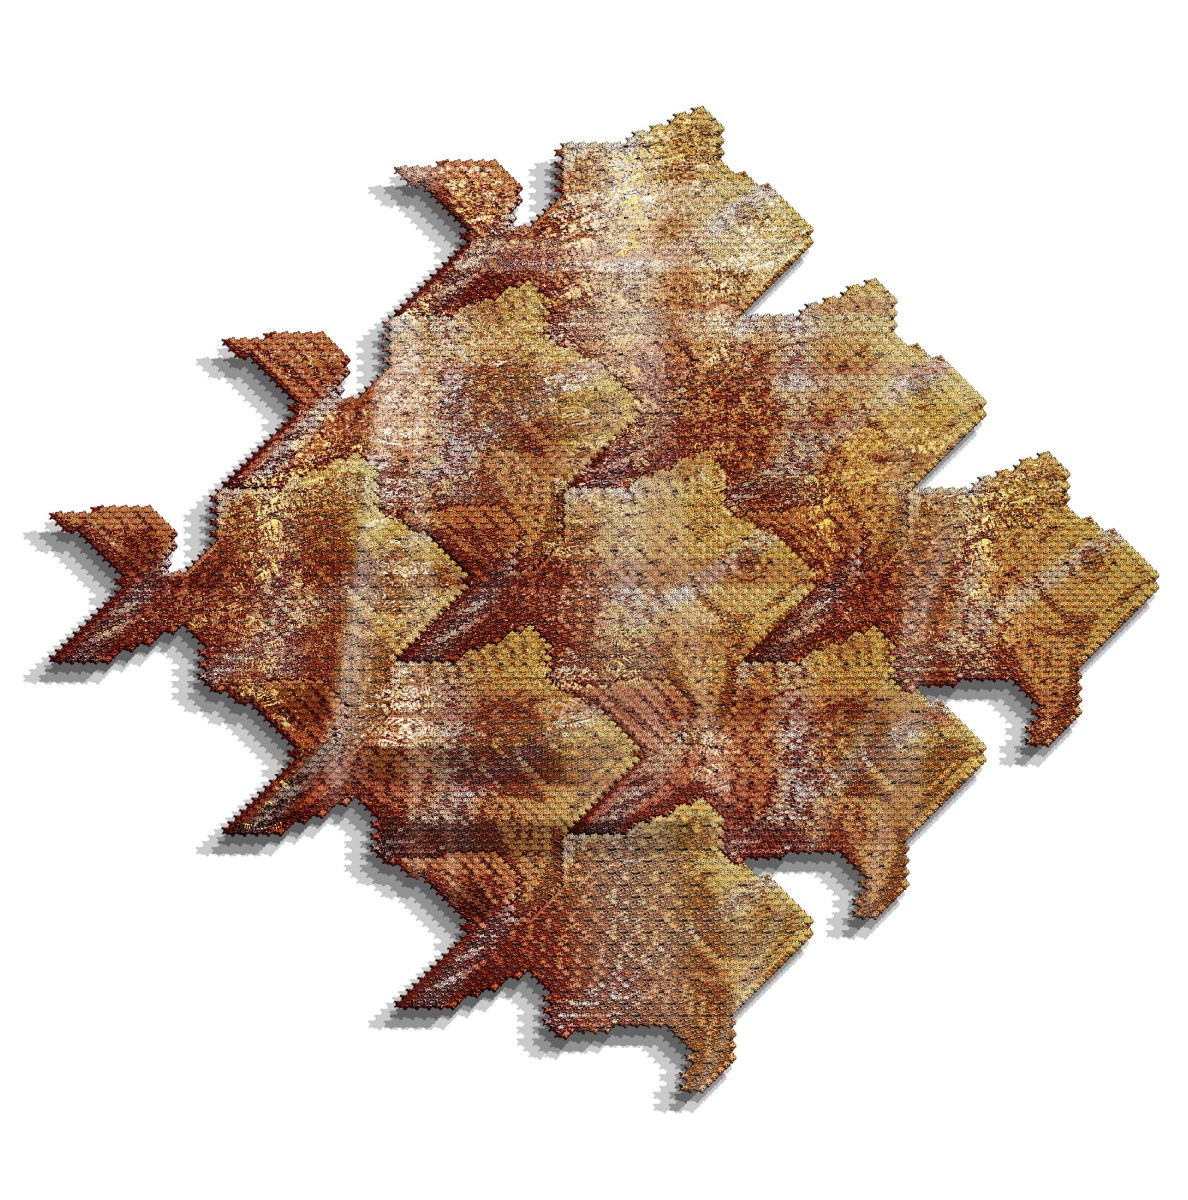 Fish Scales VII by Richard Hassell 